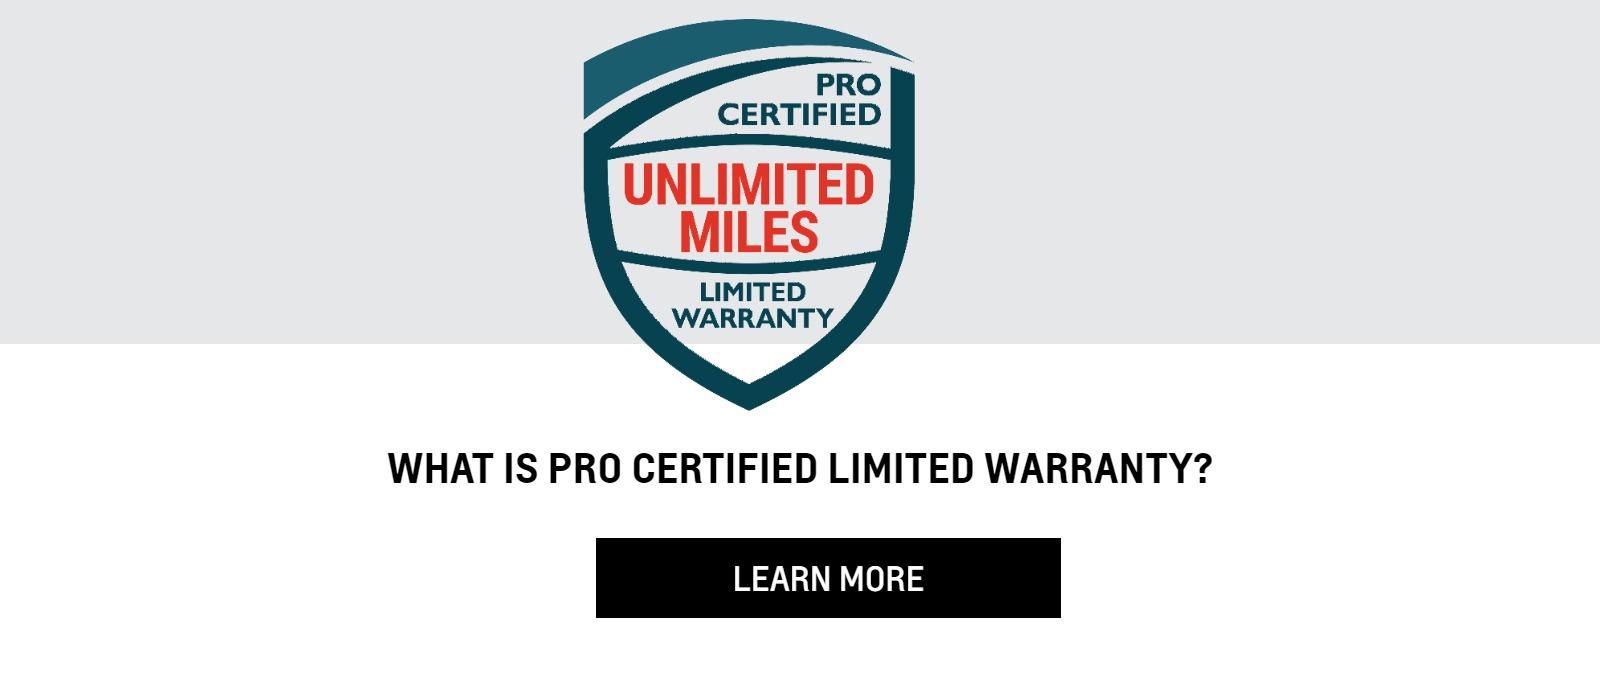 WHAT IS A PRO CERTIFIED UNLIMITED MILES WARRANTY?